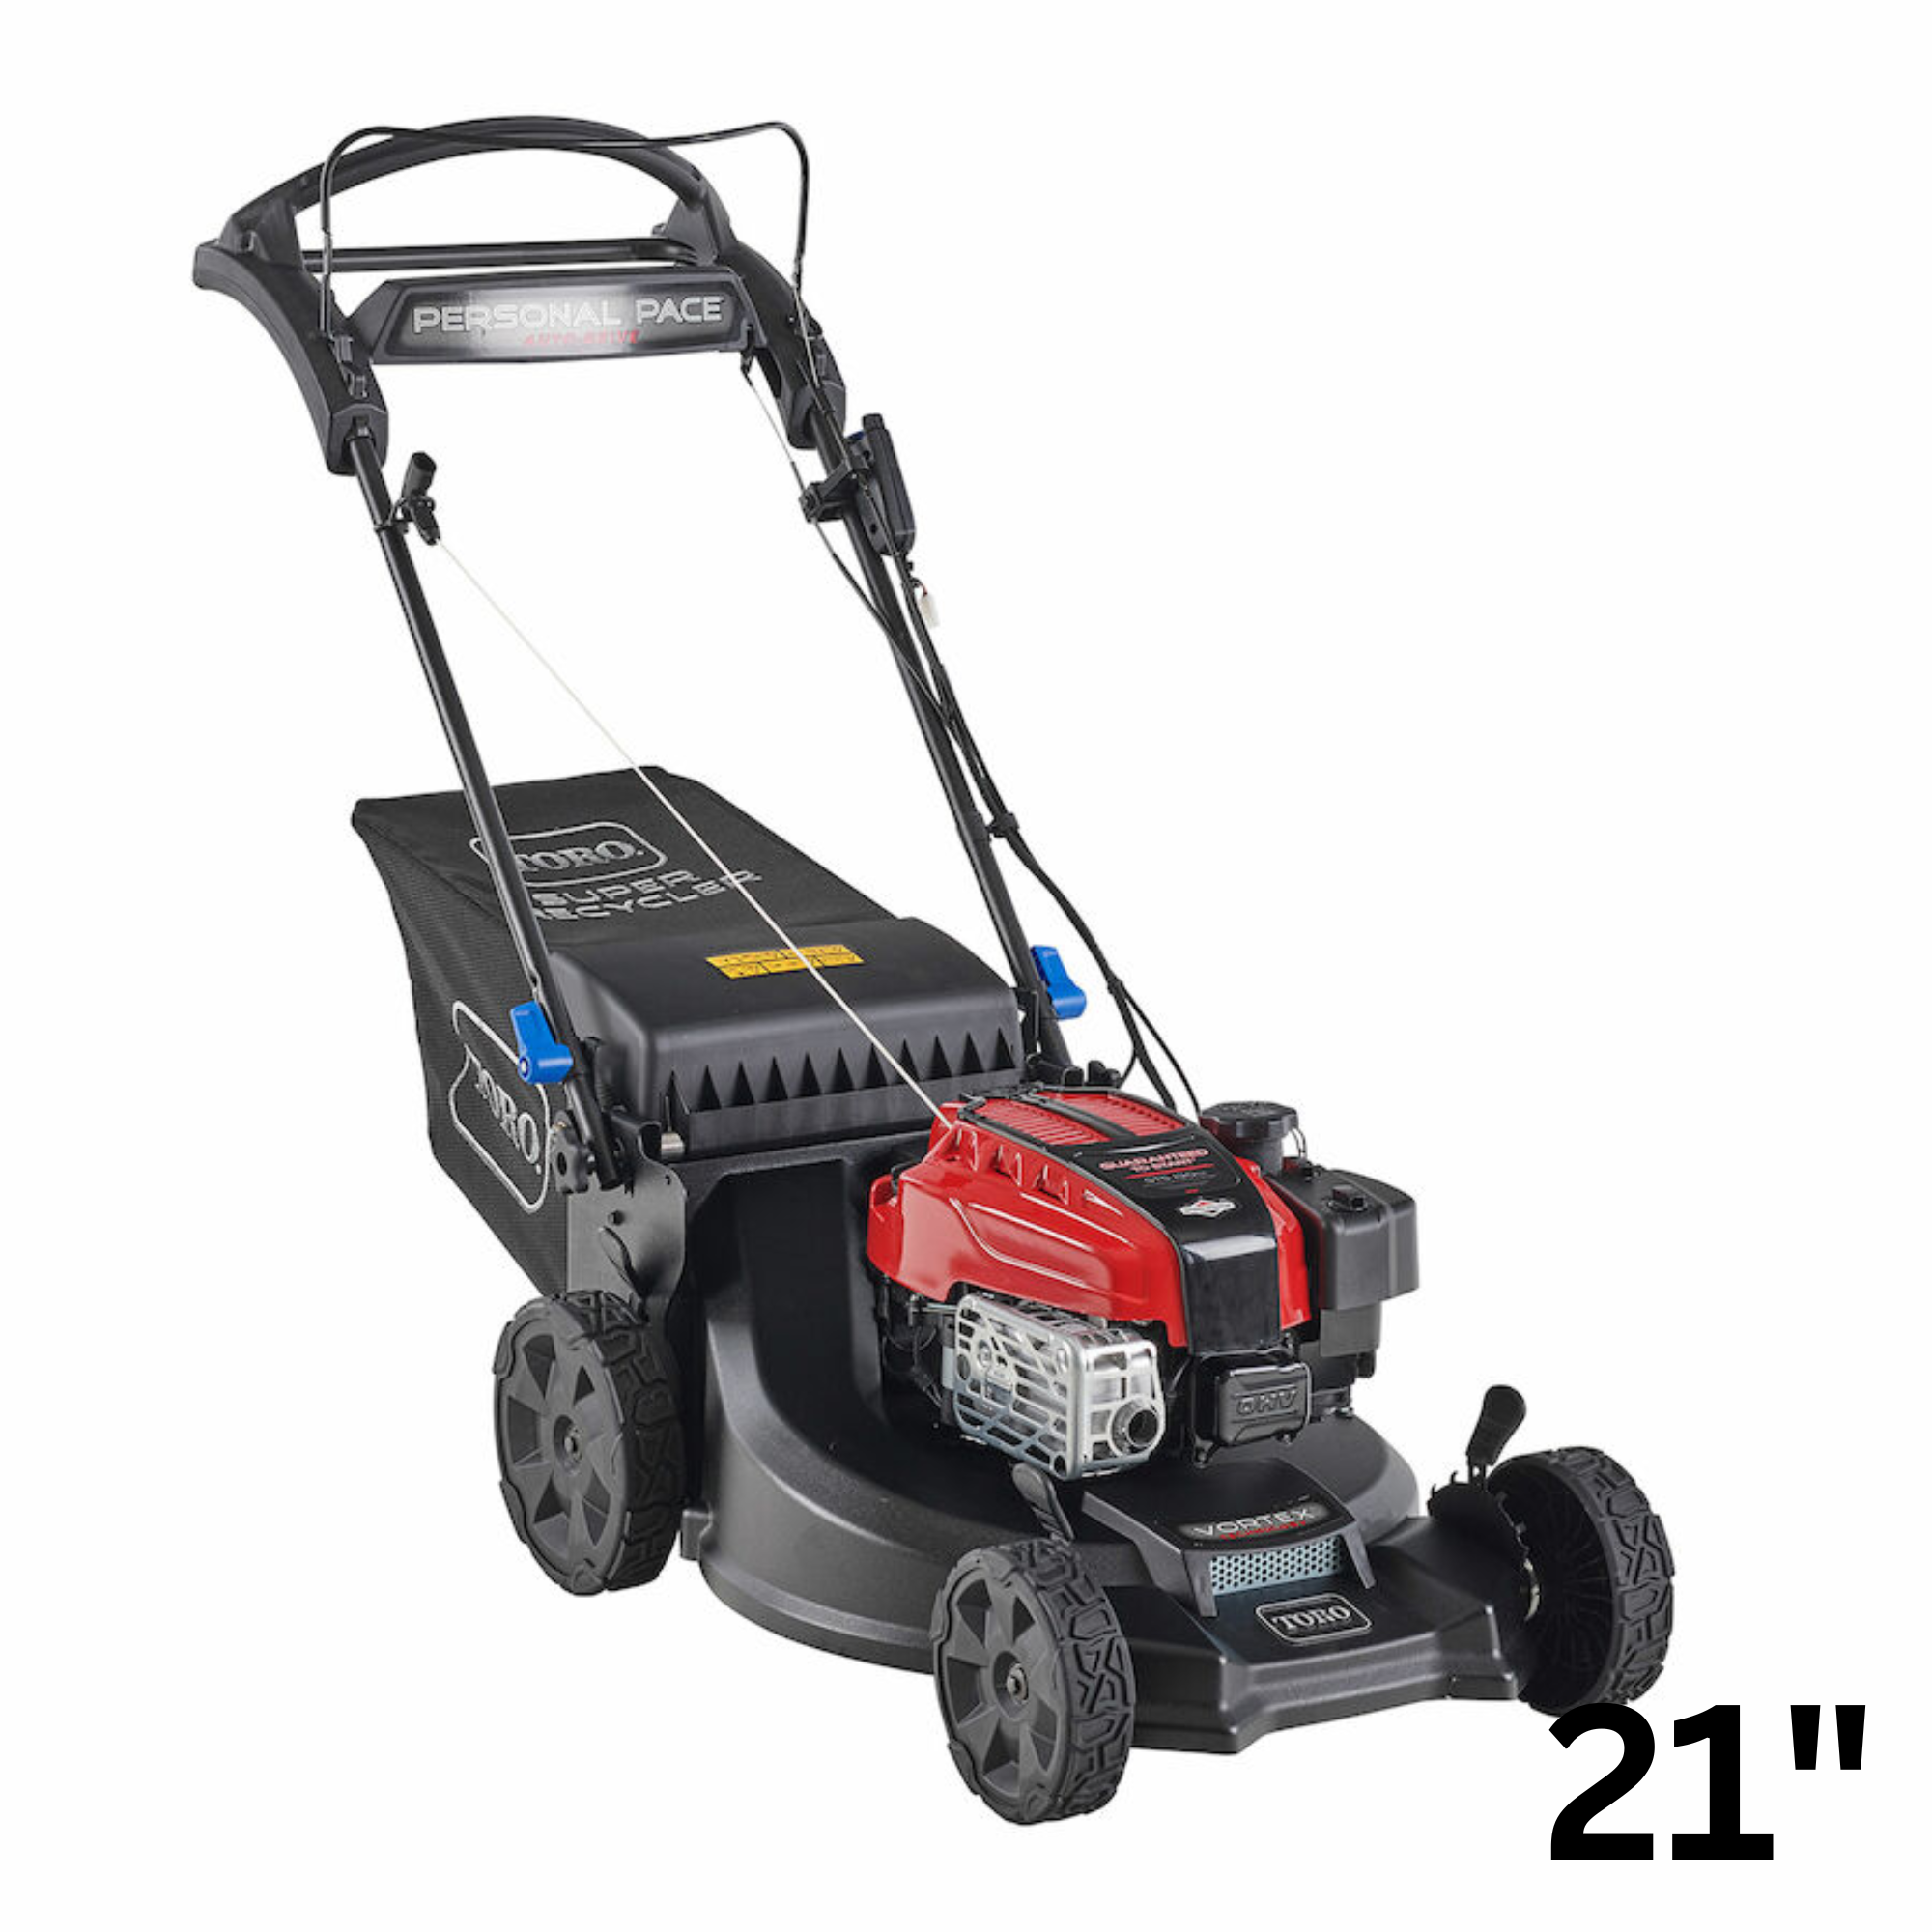 Toro Super Recycler w/Personal Pace & SmartStow Gas Powered Lawn Mower | 21 in. Deck | 21564